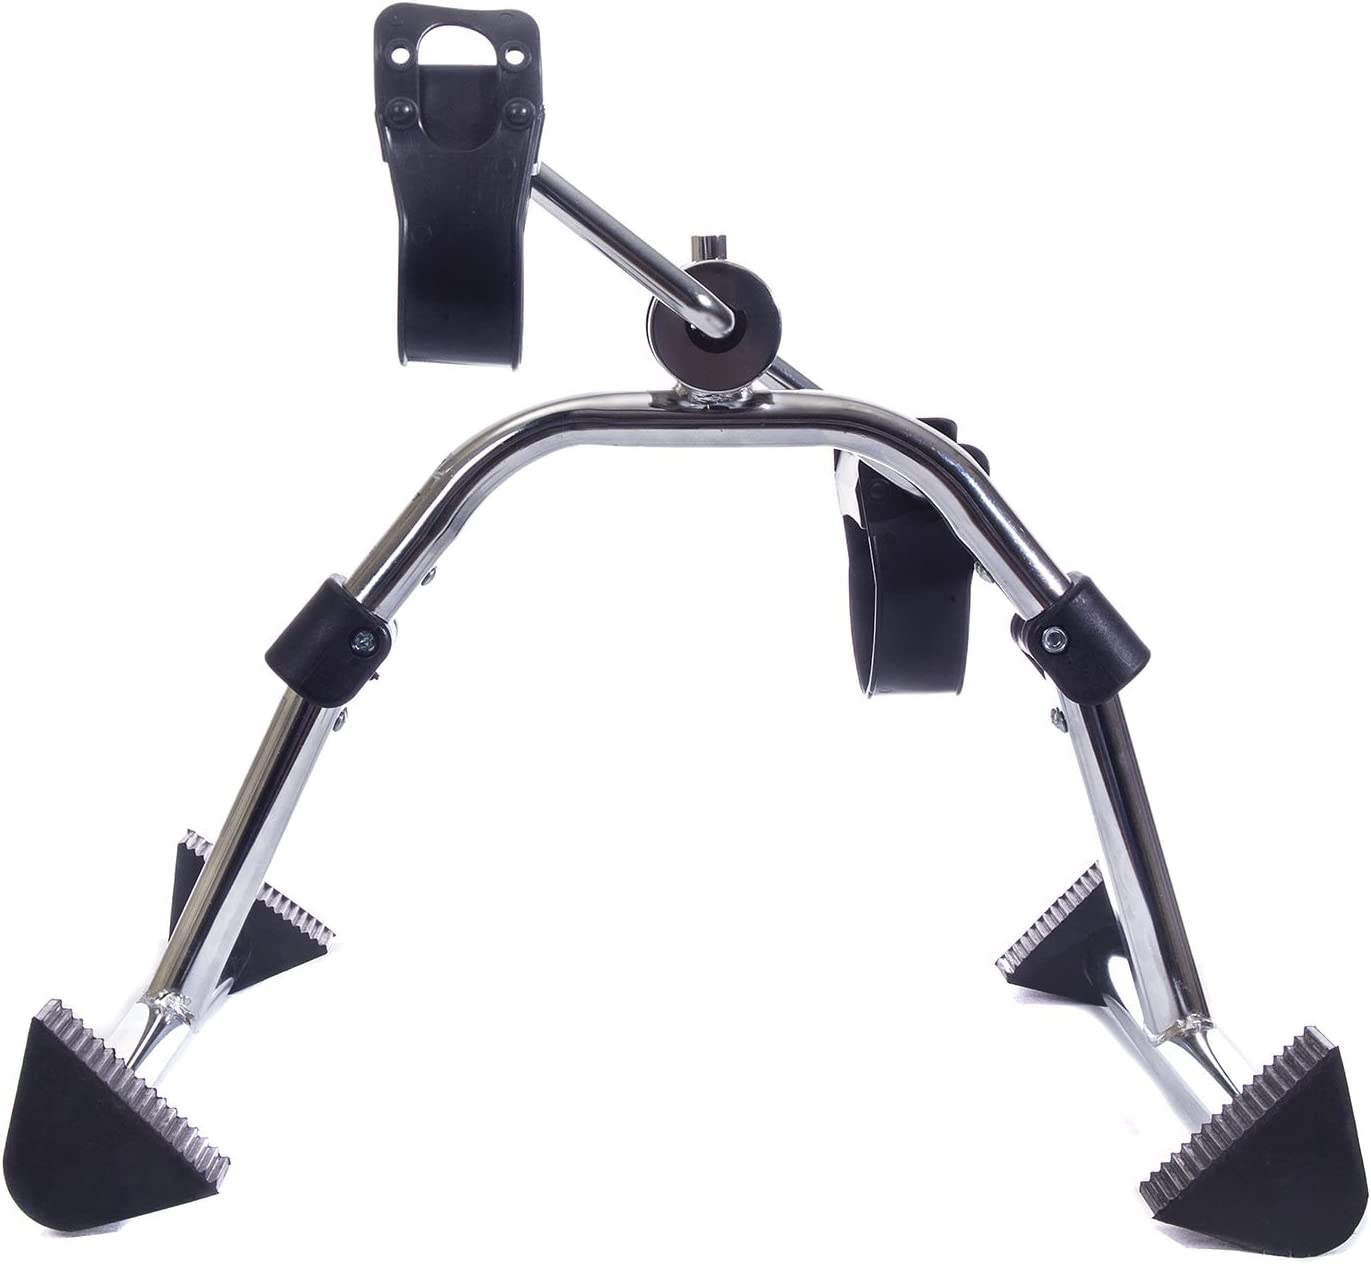 Essential Medical Supply Chrome Folding Pedal Exerciser with Adjustable Tension Knob and Flat Non Skid Pads